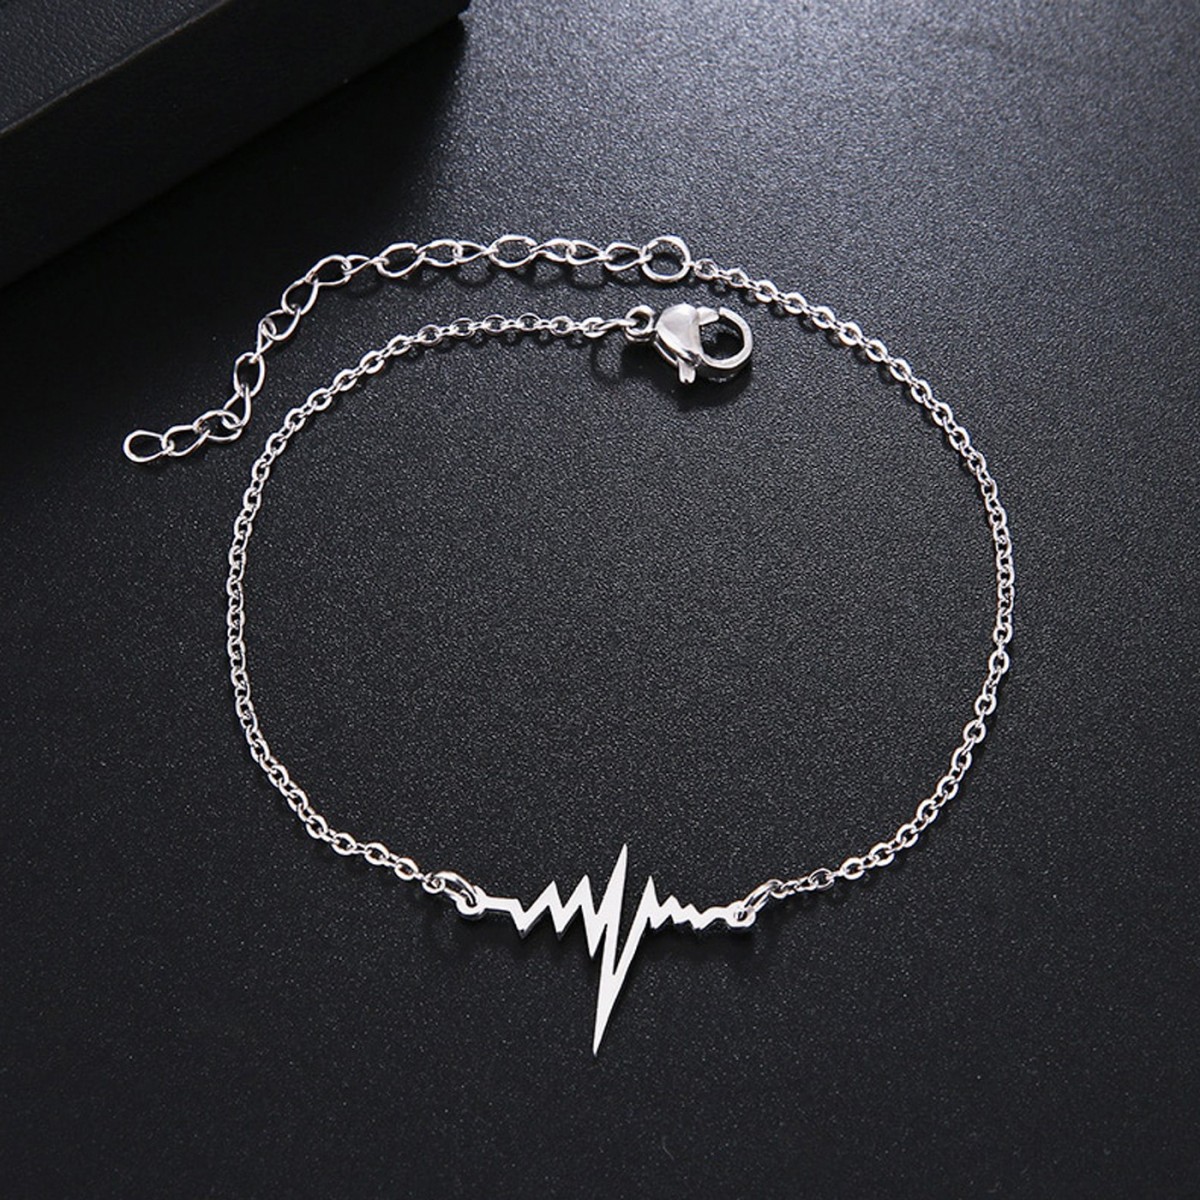 A Letter Name Chain Pendant with Heartbeat Bracelet Combo